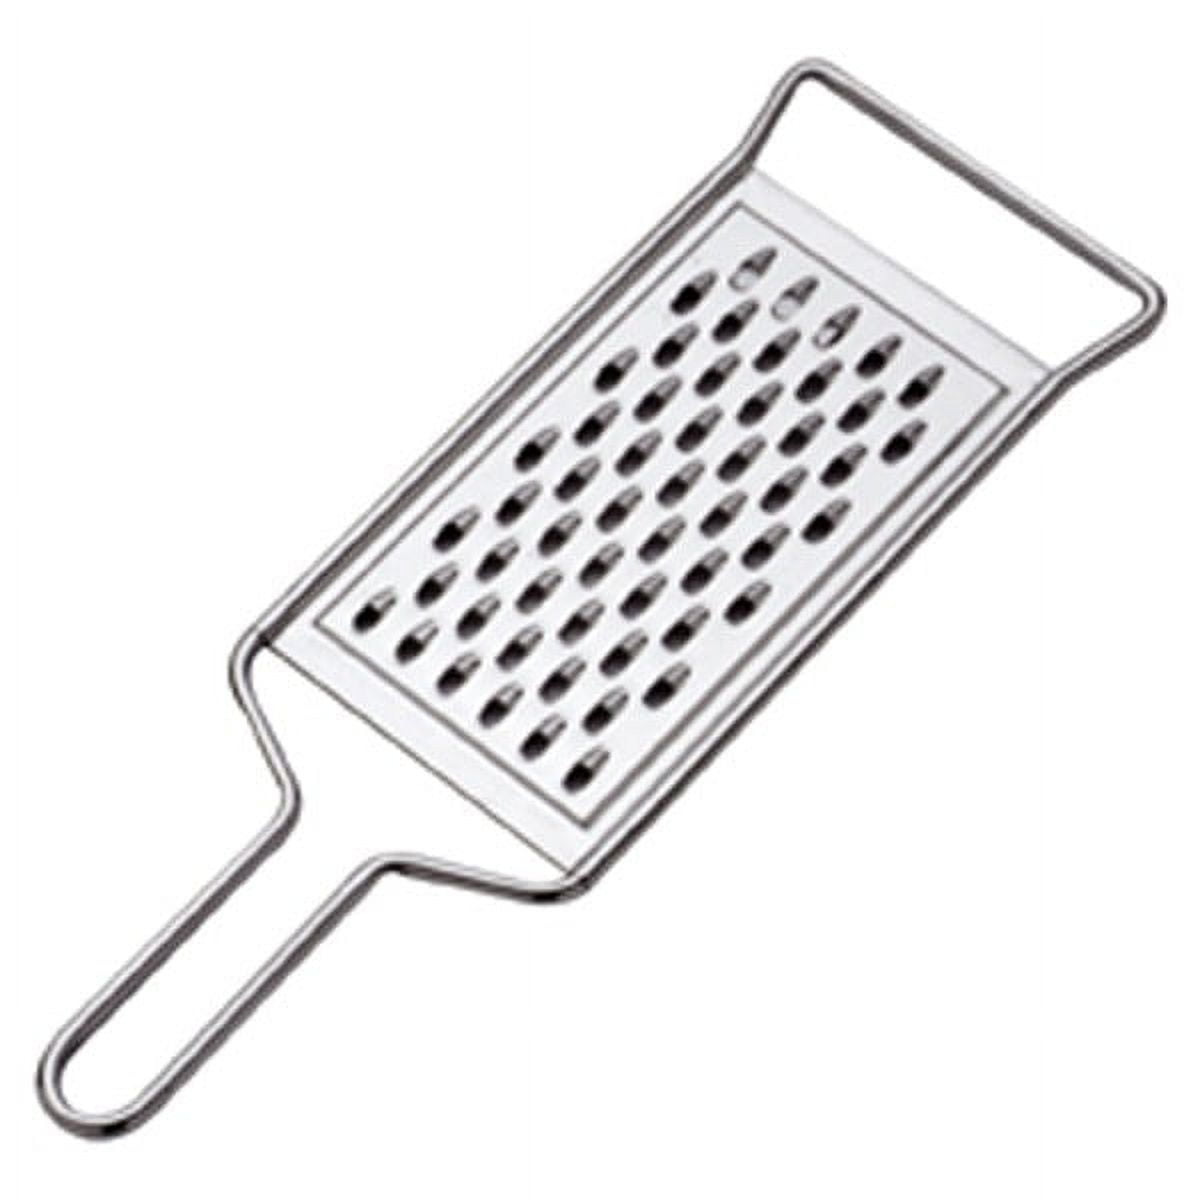 Norpro Stainless Steel 4 Sided Grater W/Catcher 325